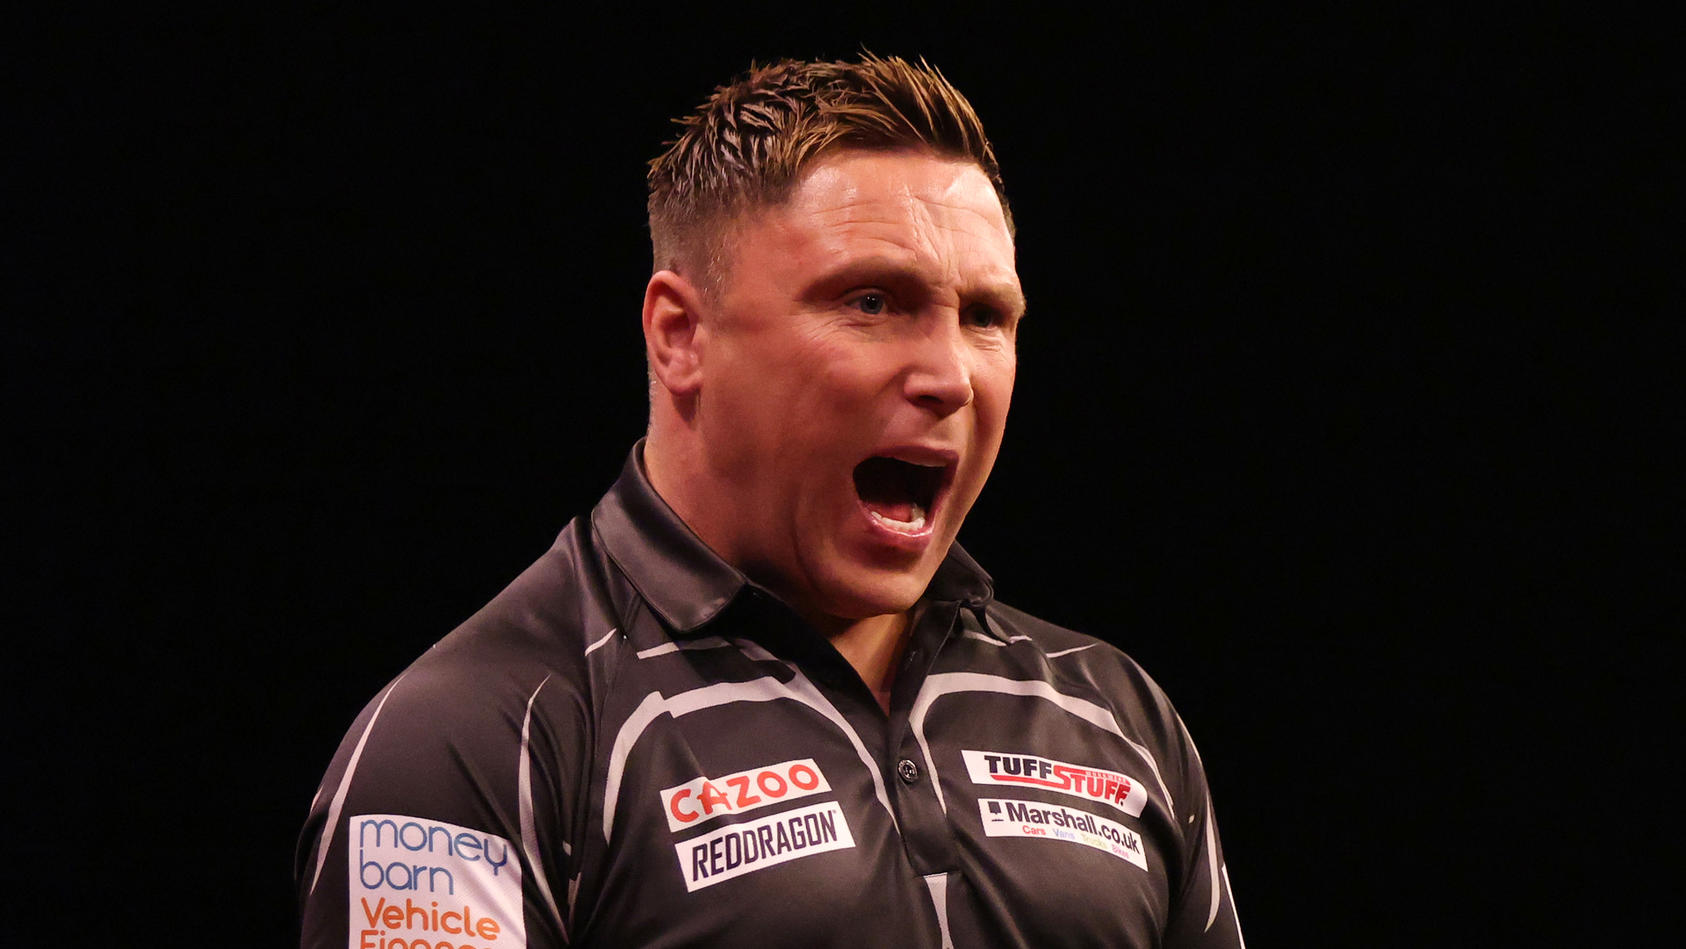 SHEFFIELD, ENGLAND - MAY 12: Gerwyn Price of Wales celebrates during their match against Michael van Gerwen of Netherlands on night 14 of the Cazoo Premier League Darts at Utilita Area Sheffield on May 12, 2022 in Sheffield, England. (Photo by George